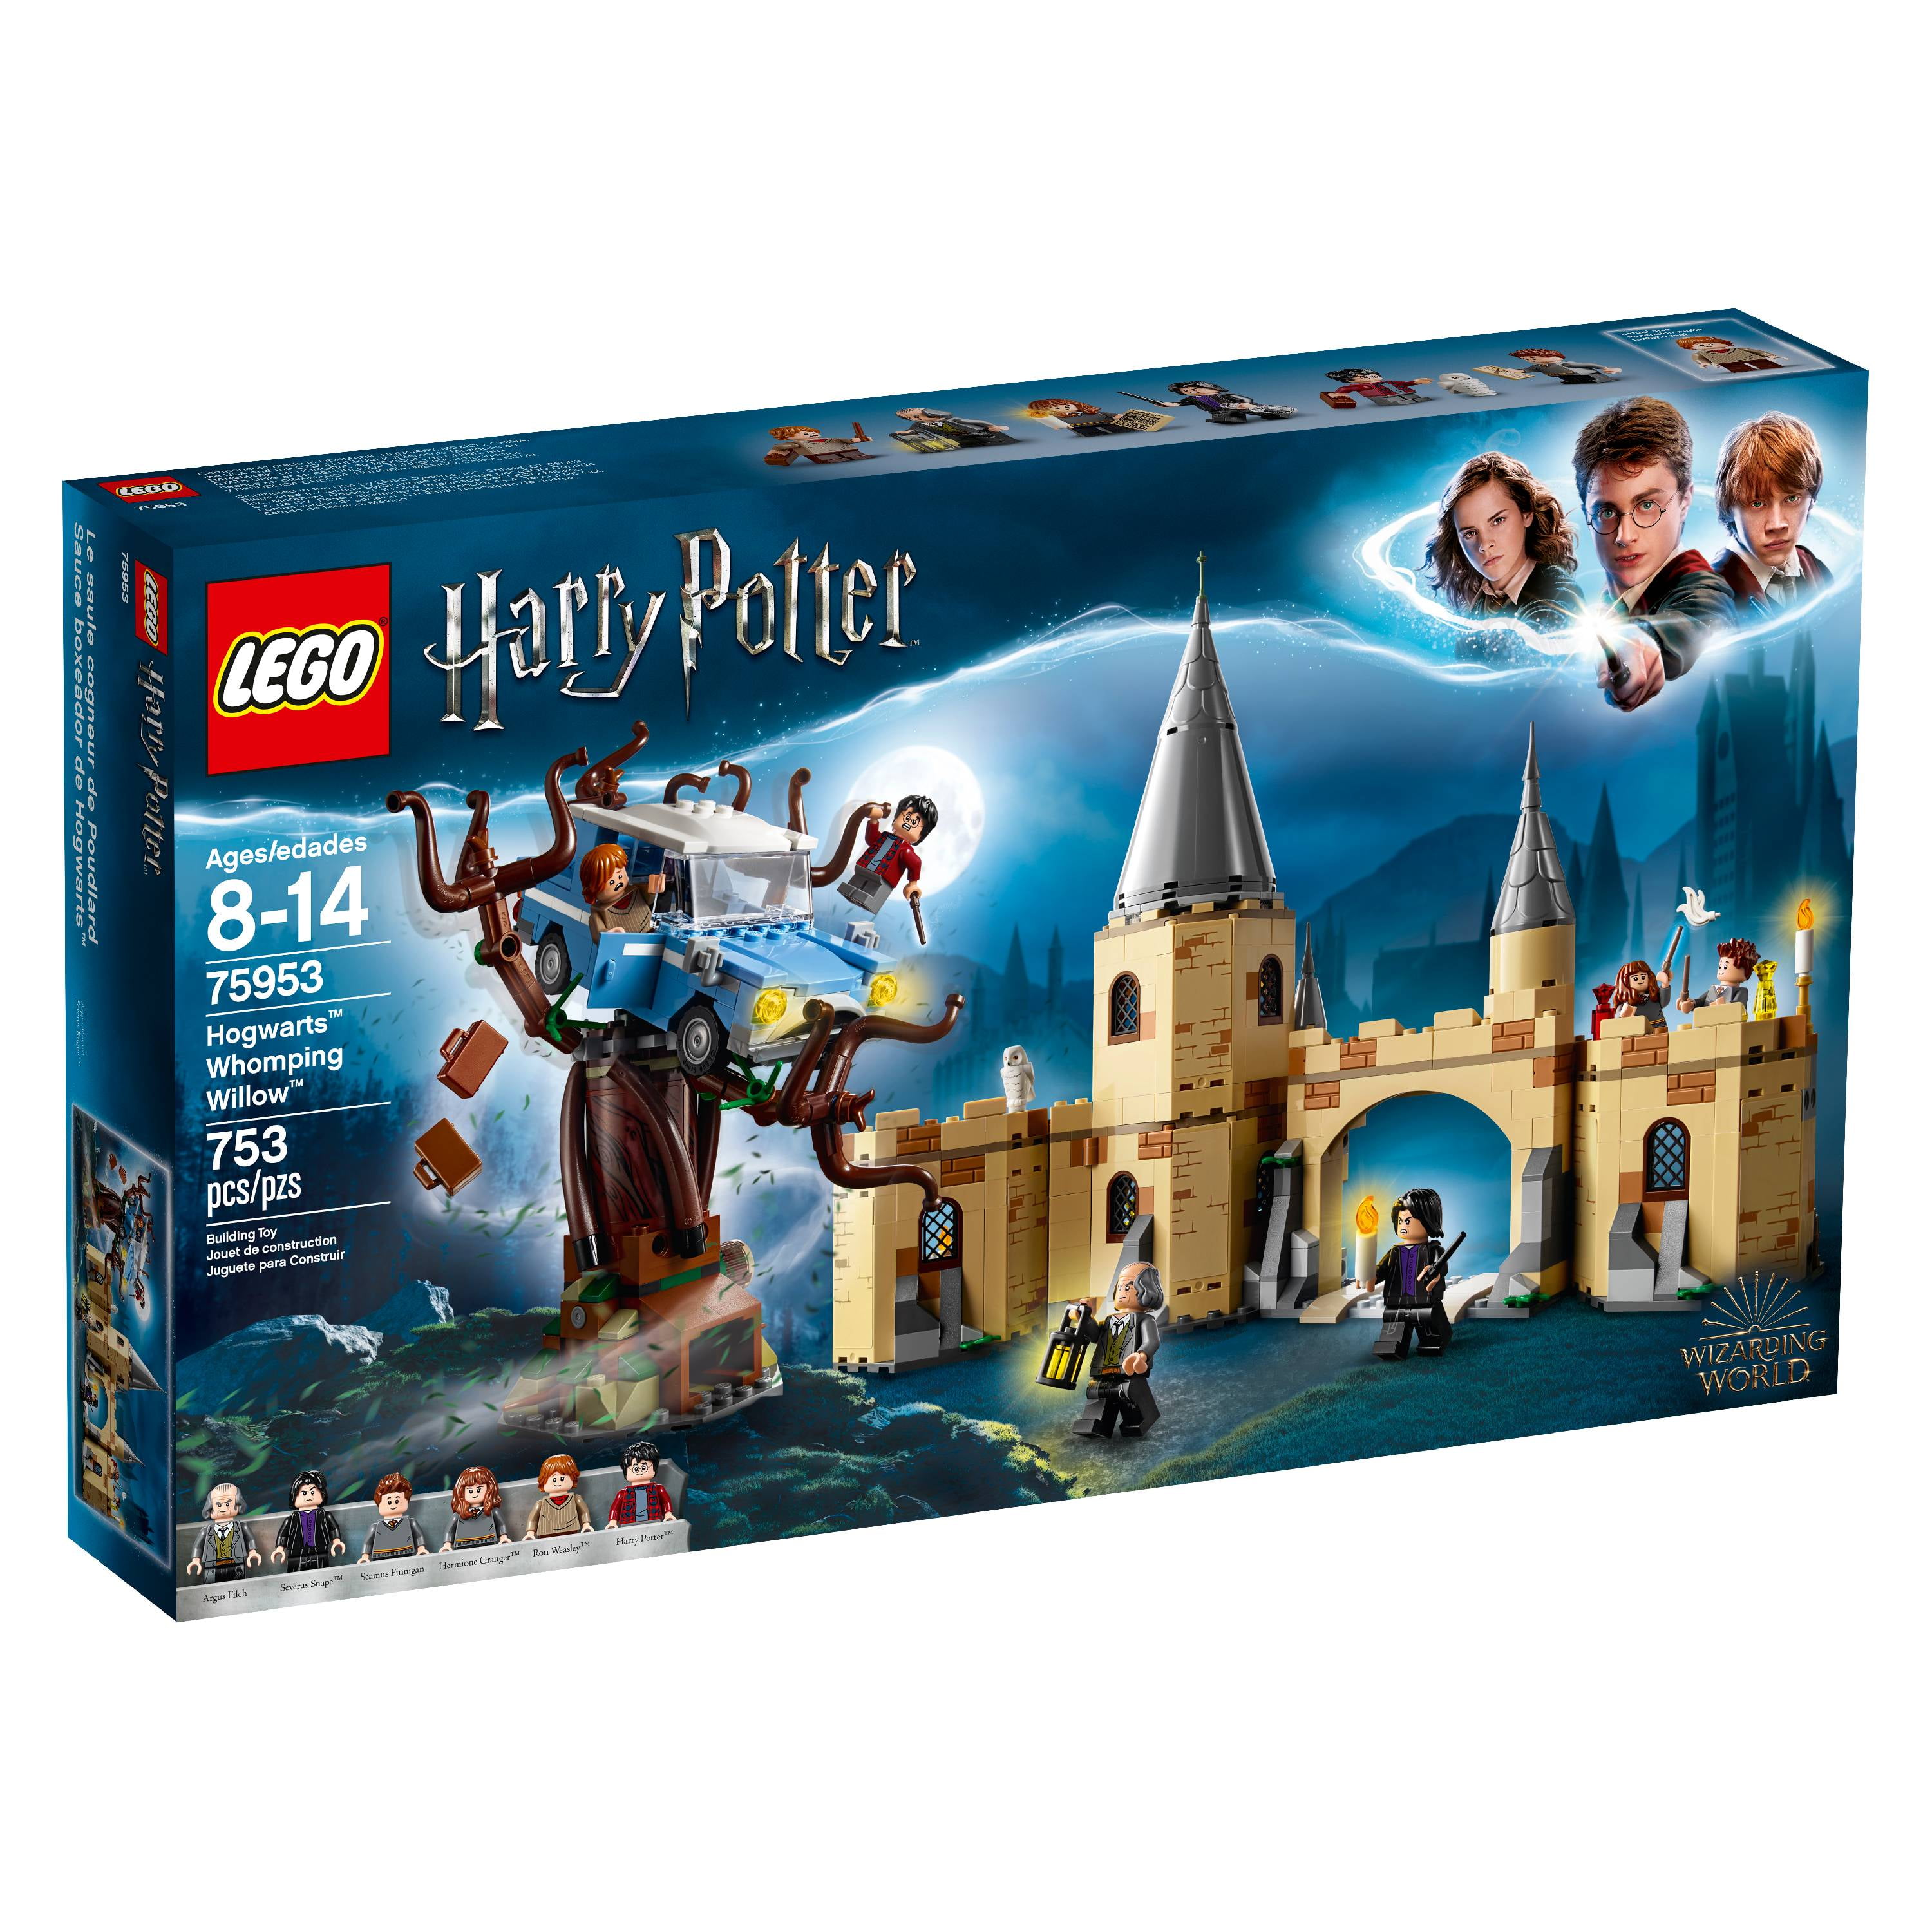 LEGO Harry Potter Whomping Willow 75953 (753 Pieces)